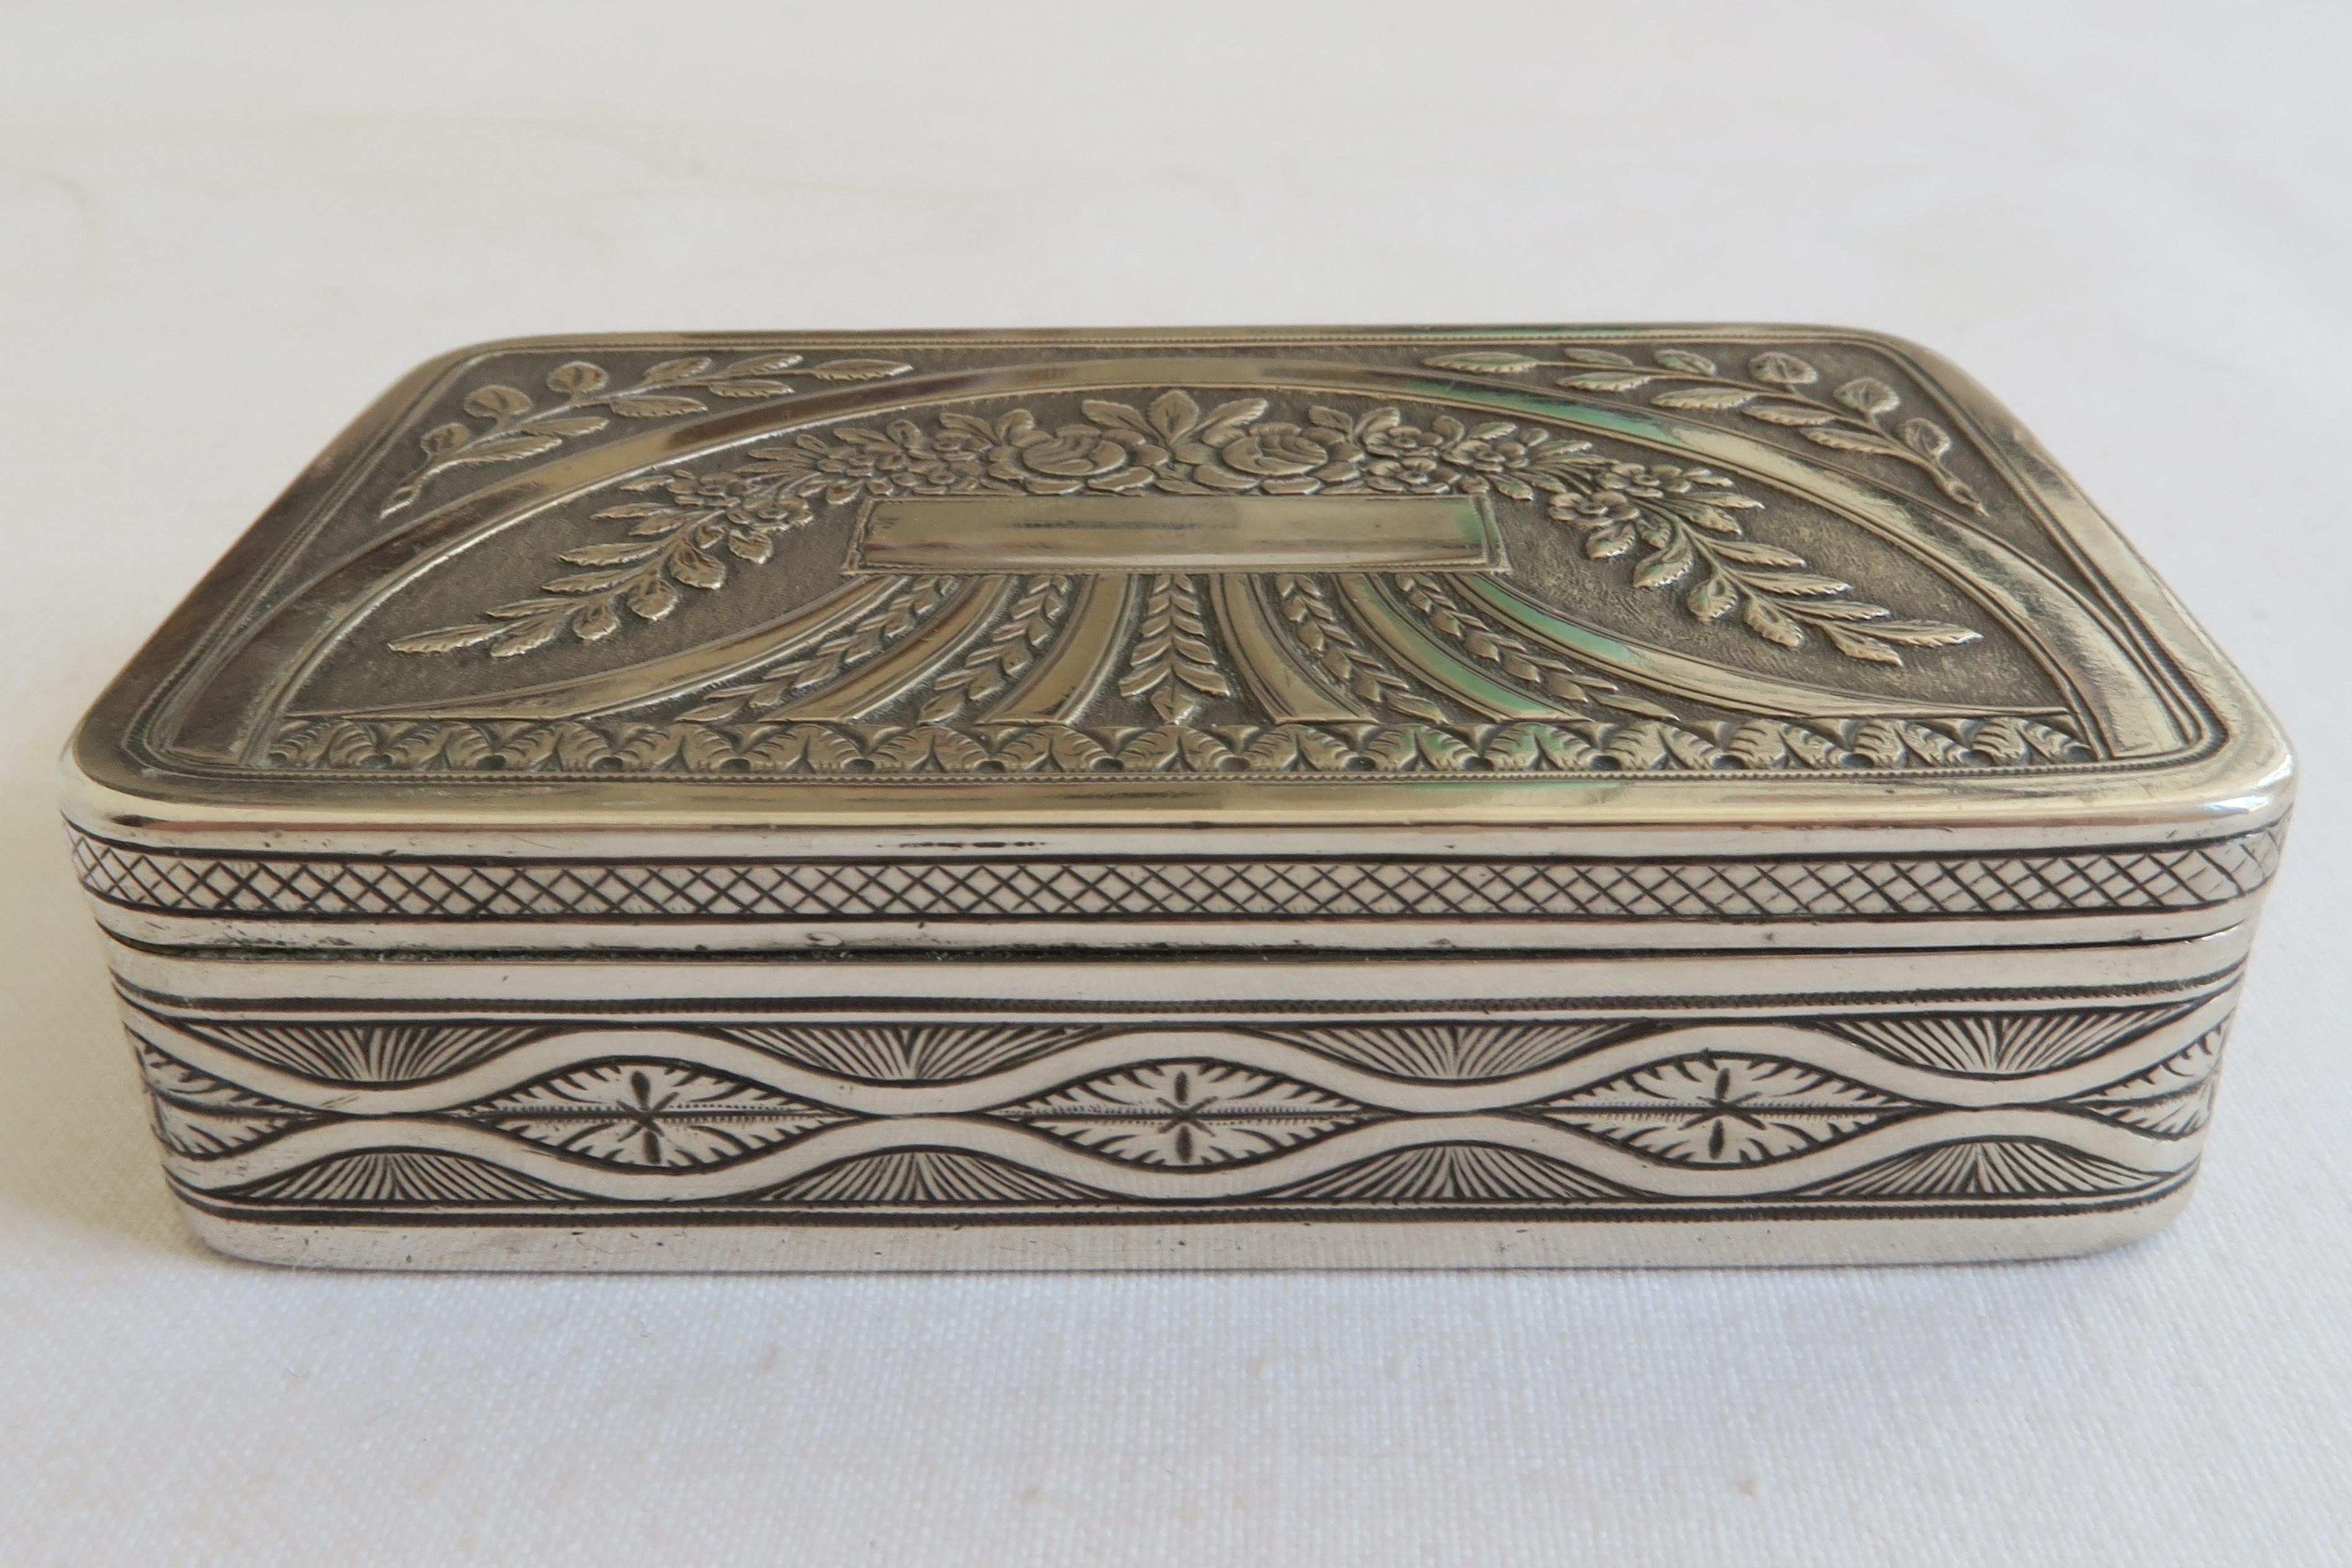 This beautiful snuff box is made from sterling silver. Its inside is gold plated. Lid and bottom are covered in the same floral design reminiscent of a bouquet or floral ornament. The box is stamped with the Austrian import Hallmark. Made ca.